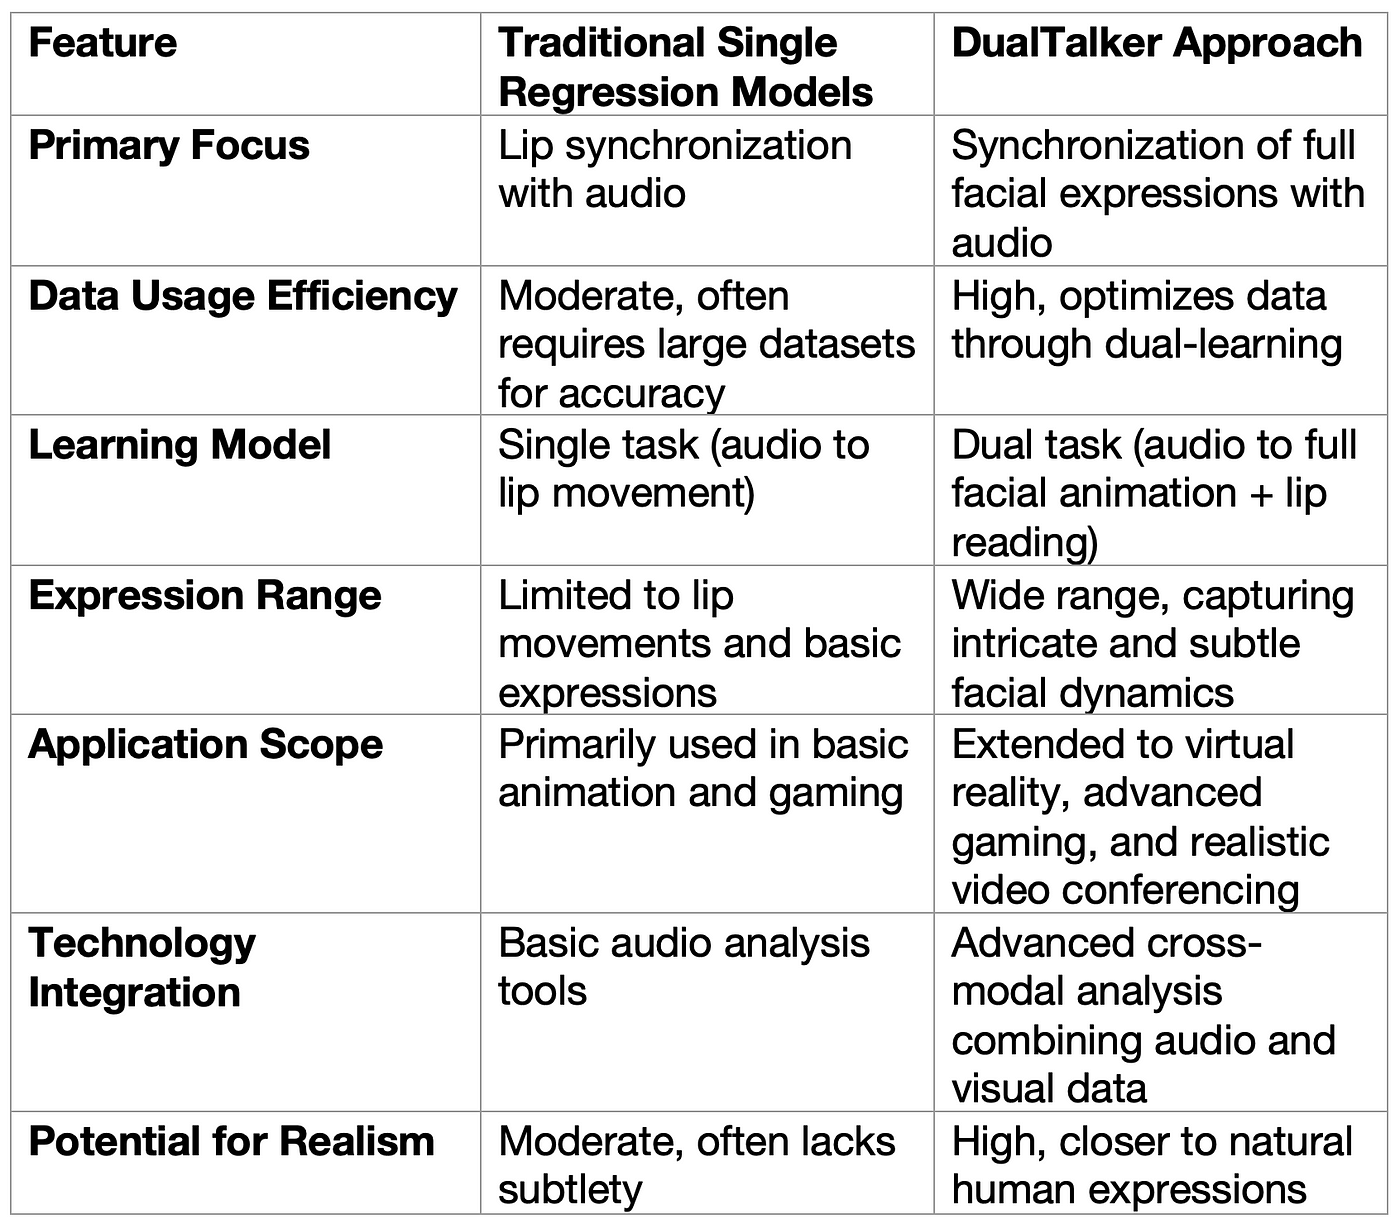 Table Comparing Traditional 3D Facial Animation with DualTalker Approach